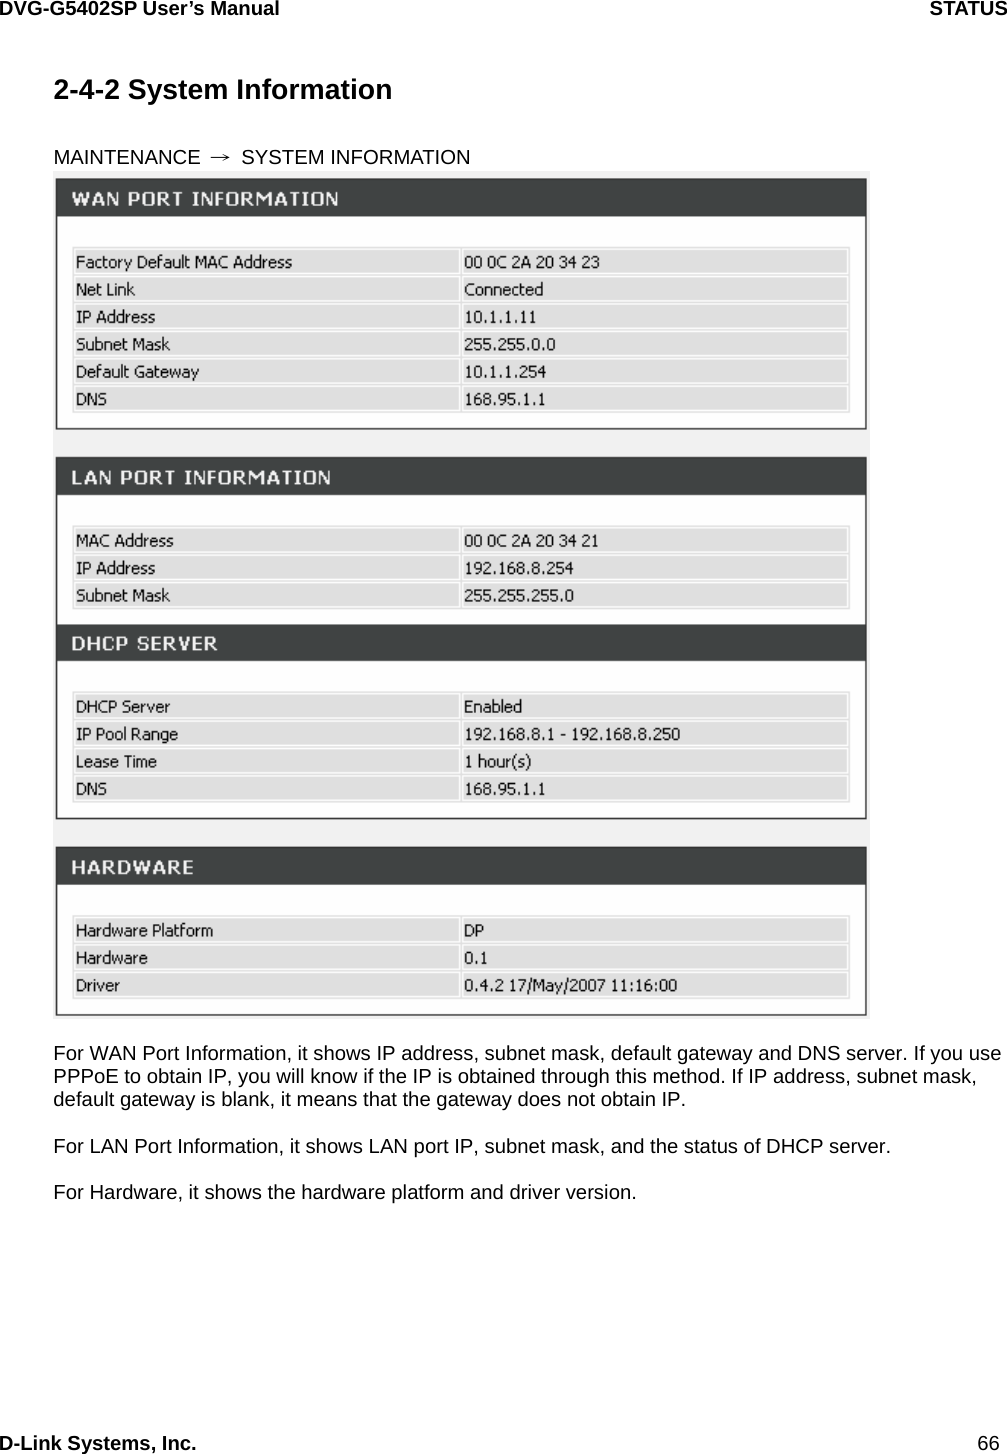 DVG-G5402SP User’s Manual                                     STATUS D-Link Systems, Inc.                                                                             66 2-4-2 System Information  MAINTENANCE  → SYSTEM INFORMATION   For WAN Port Information, it shows IP address, subnet mask, default gateway and DNS server. If you use PPPoE to obtain IP, you will know if the IP is obtained through this method. If IP address, subnet mask, default gateway is blank, it means that the gateway does not obtain IP.  For LAN Port Information, it shows LAN port IP, subnet mask, and the status of DHCP server.  For Hardware, it shows the hardware platform and driver version.   